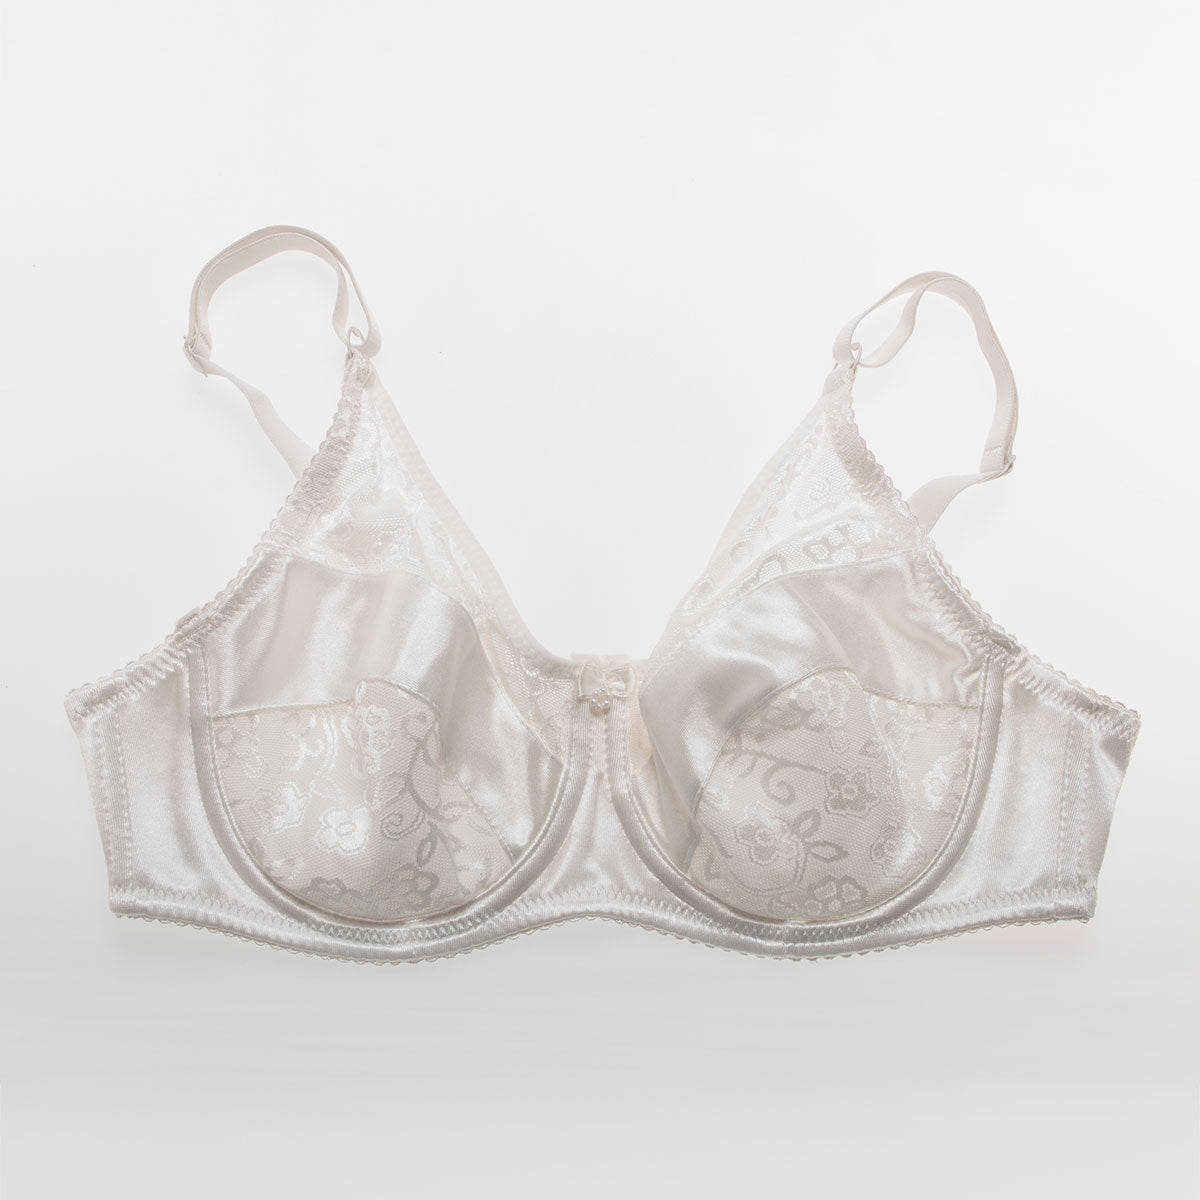 Teardrop Shaped Silicone Breast Forms with White Pocket Bra